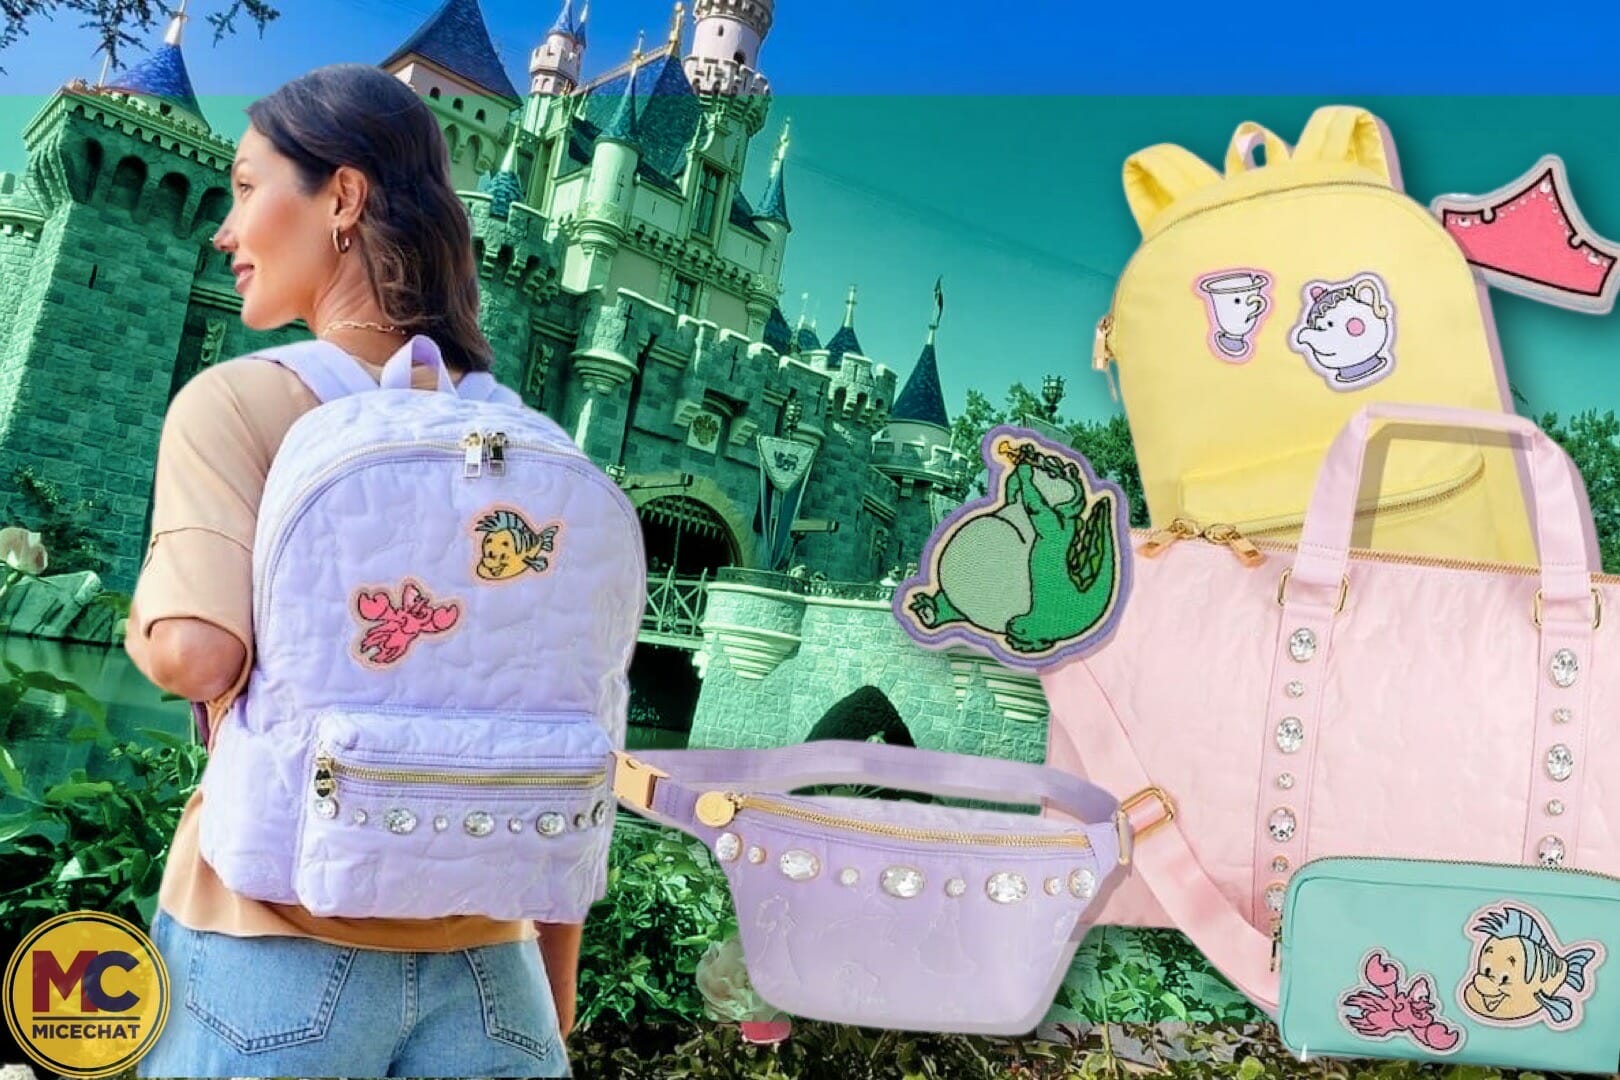 Stoney Clover Lane Sale on shopDisney - Discount Backpacks, Pouches,  Patches, and More — EXTRA MAGIC MINUTES